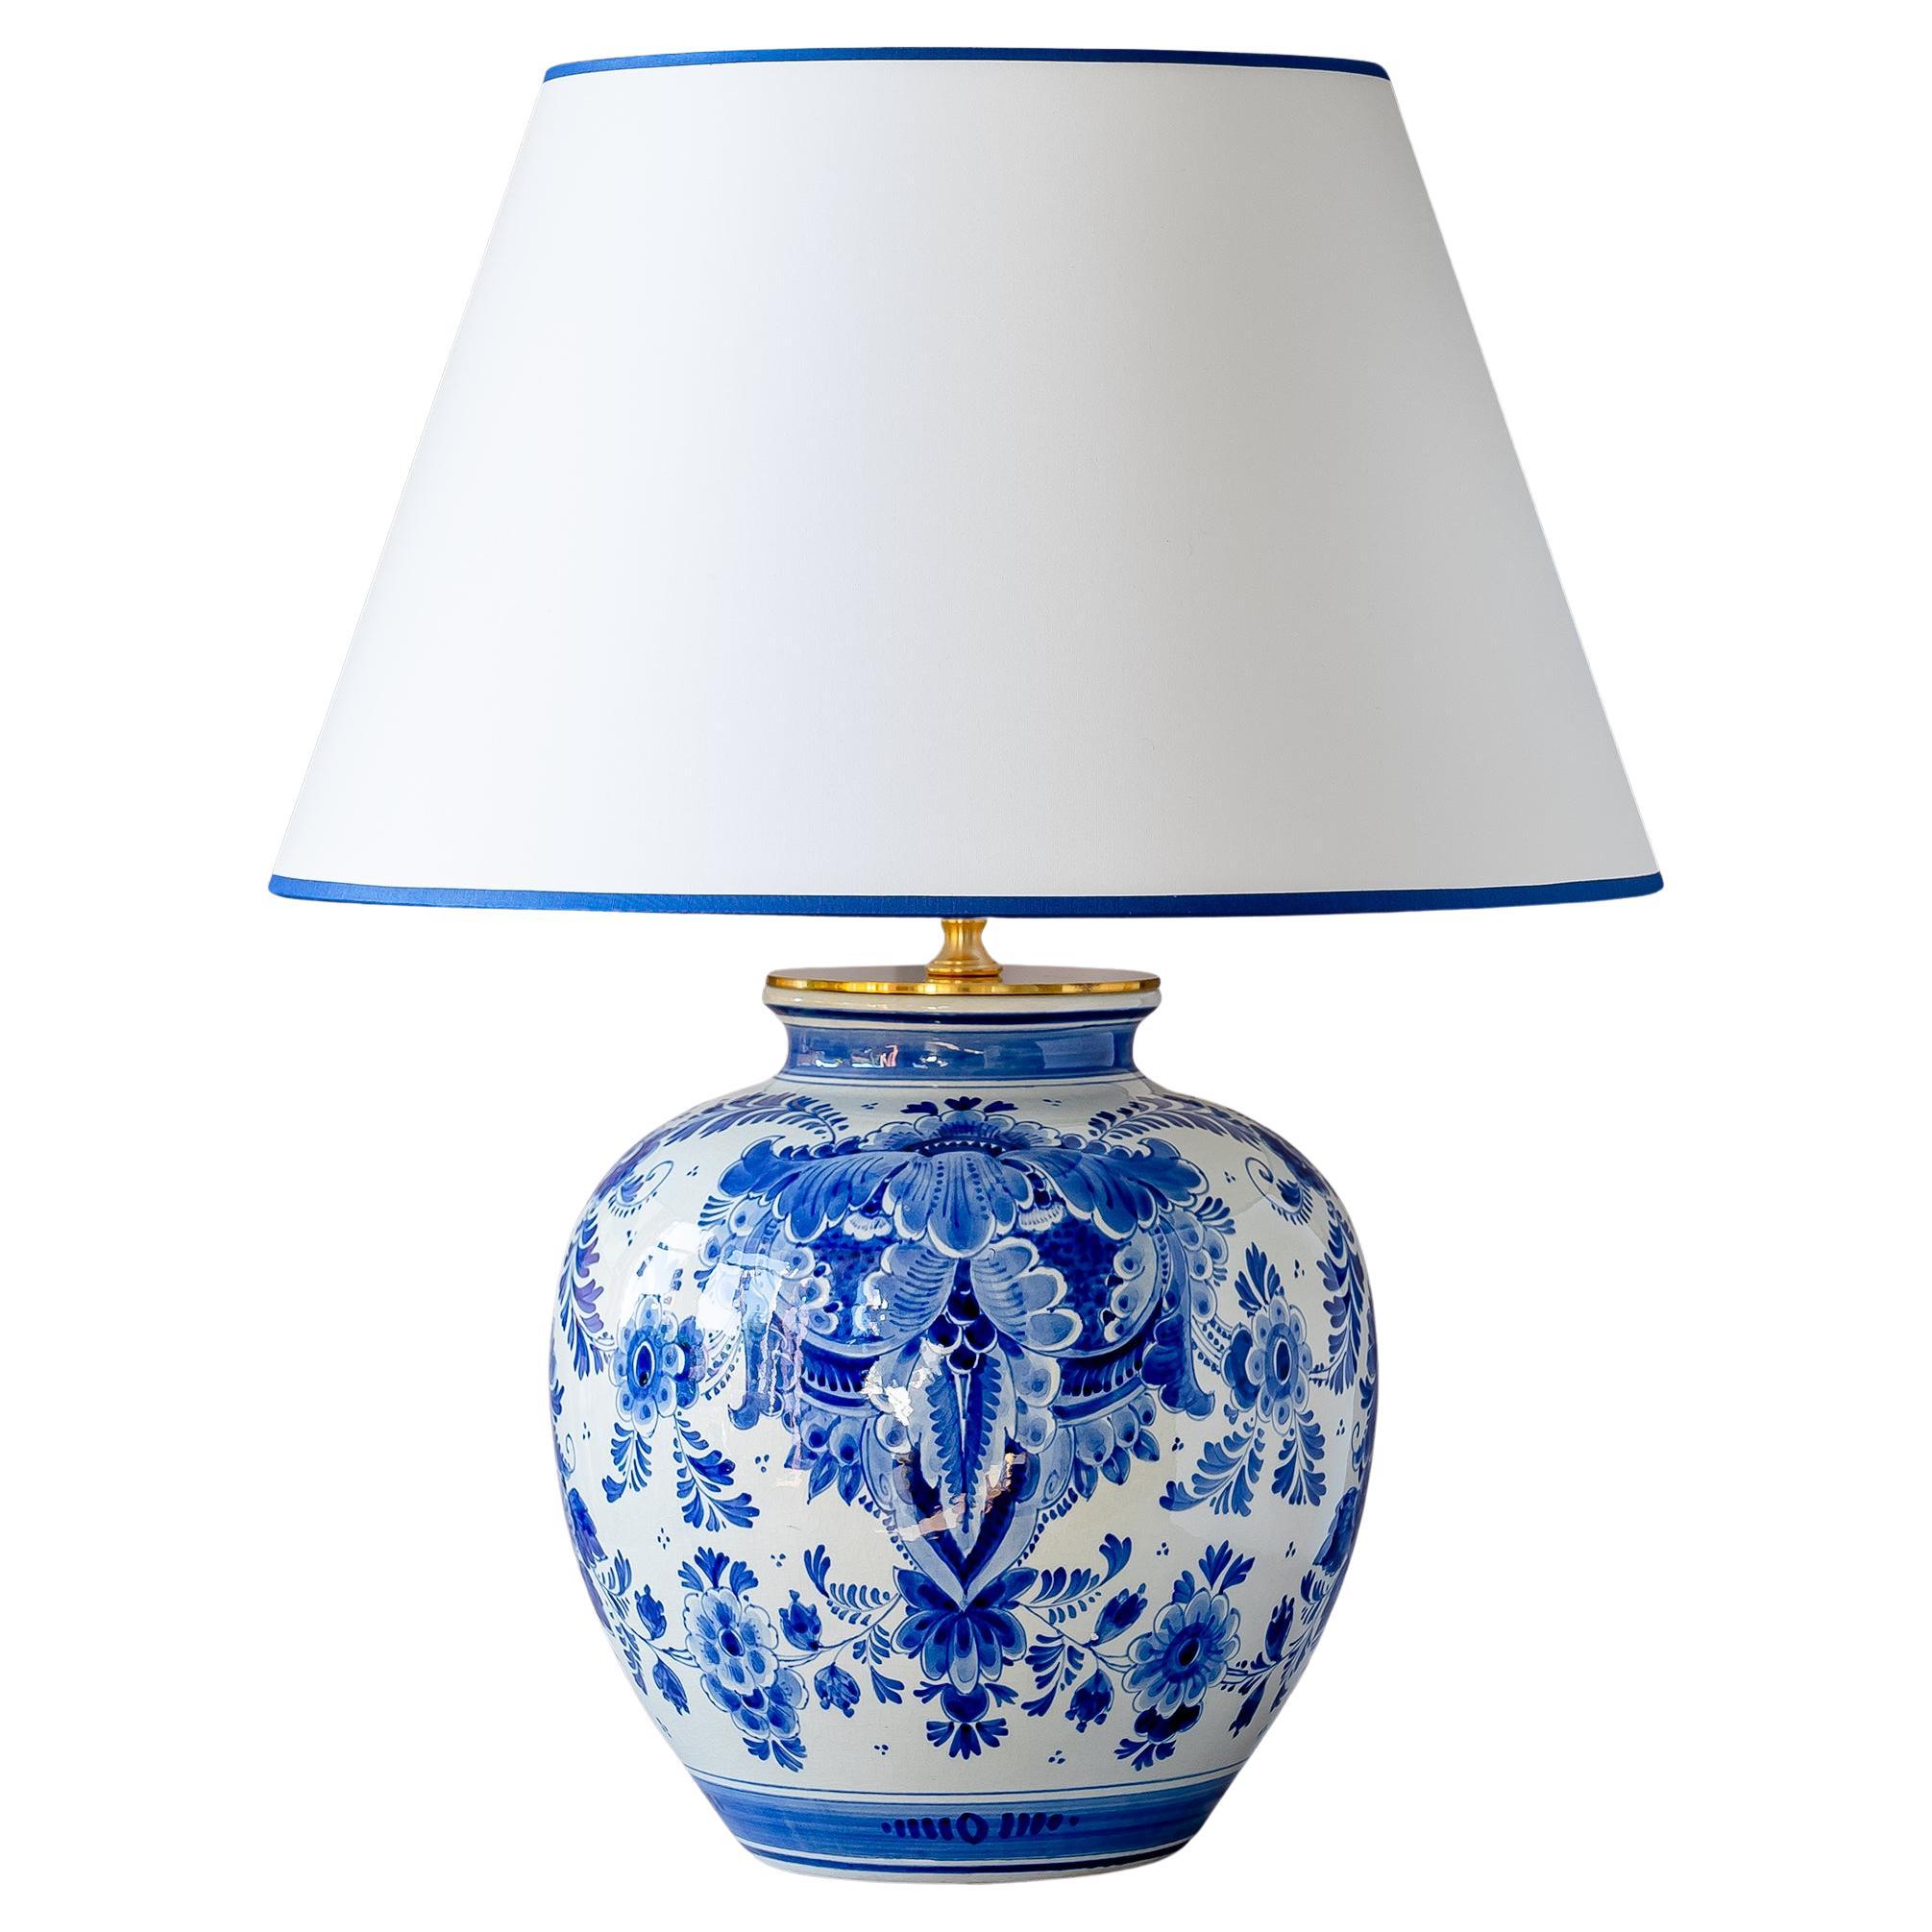 Royal Delft Blue 1974 Vase Table Lamp, White Satin Lampshade with Cobalt Trim For Sale